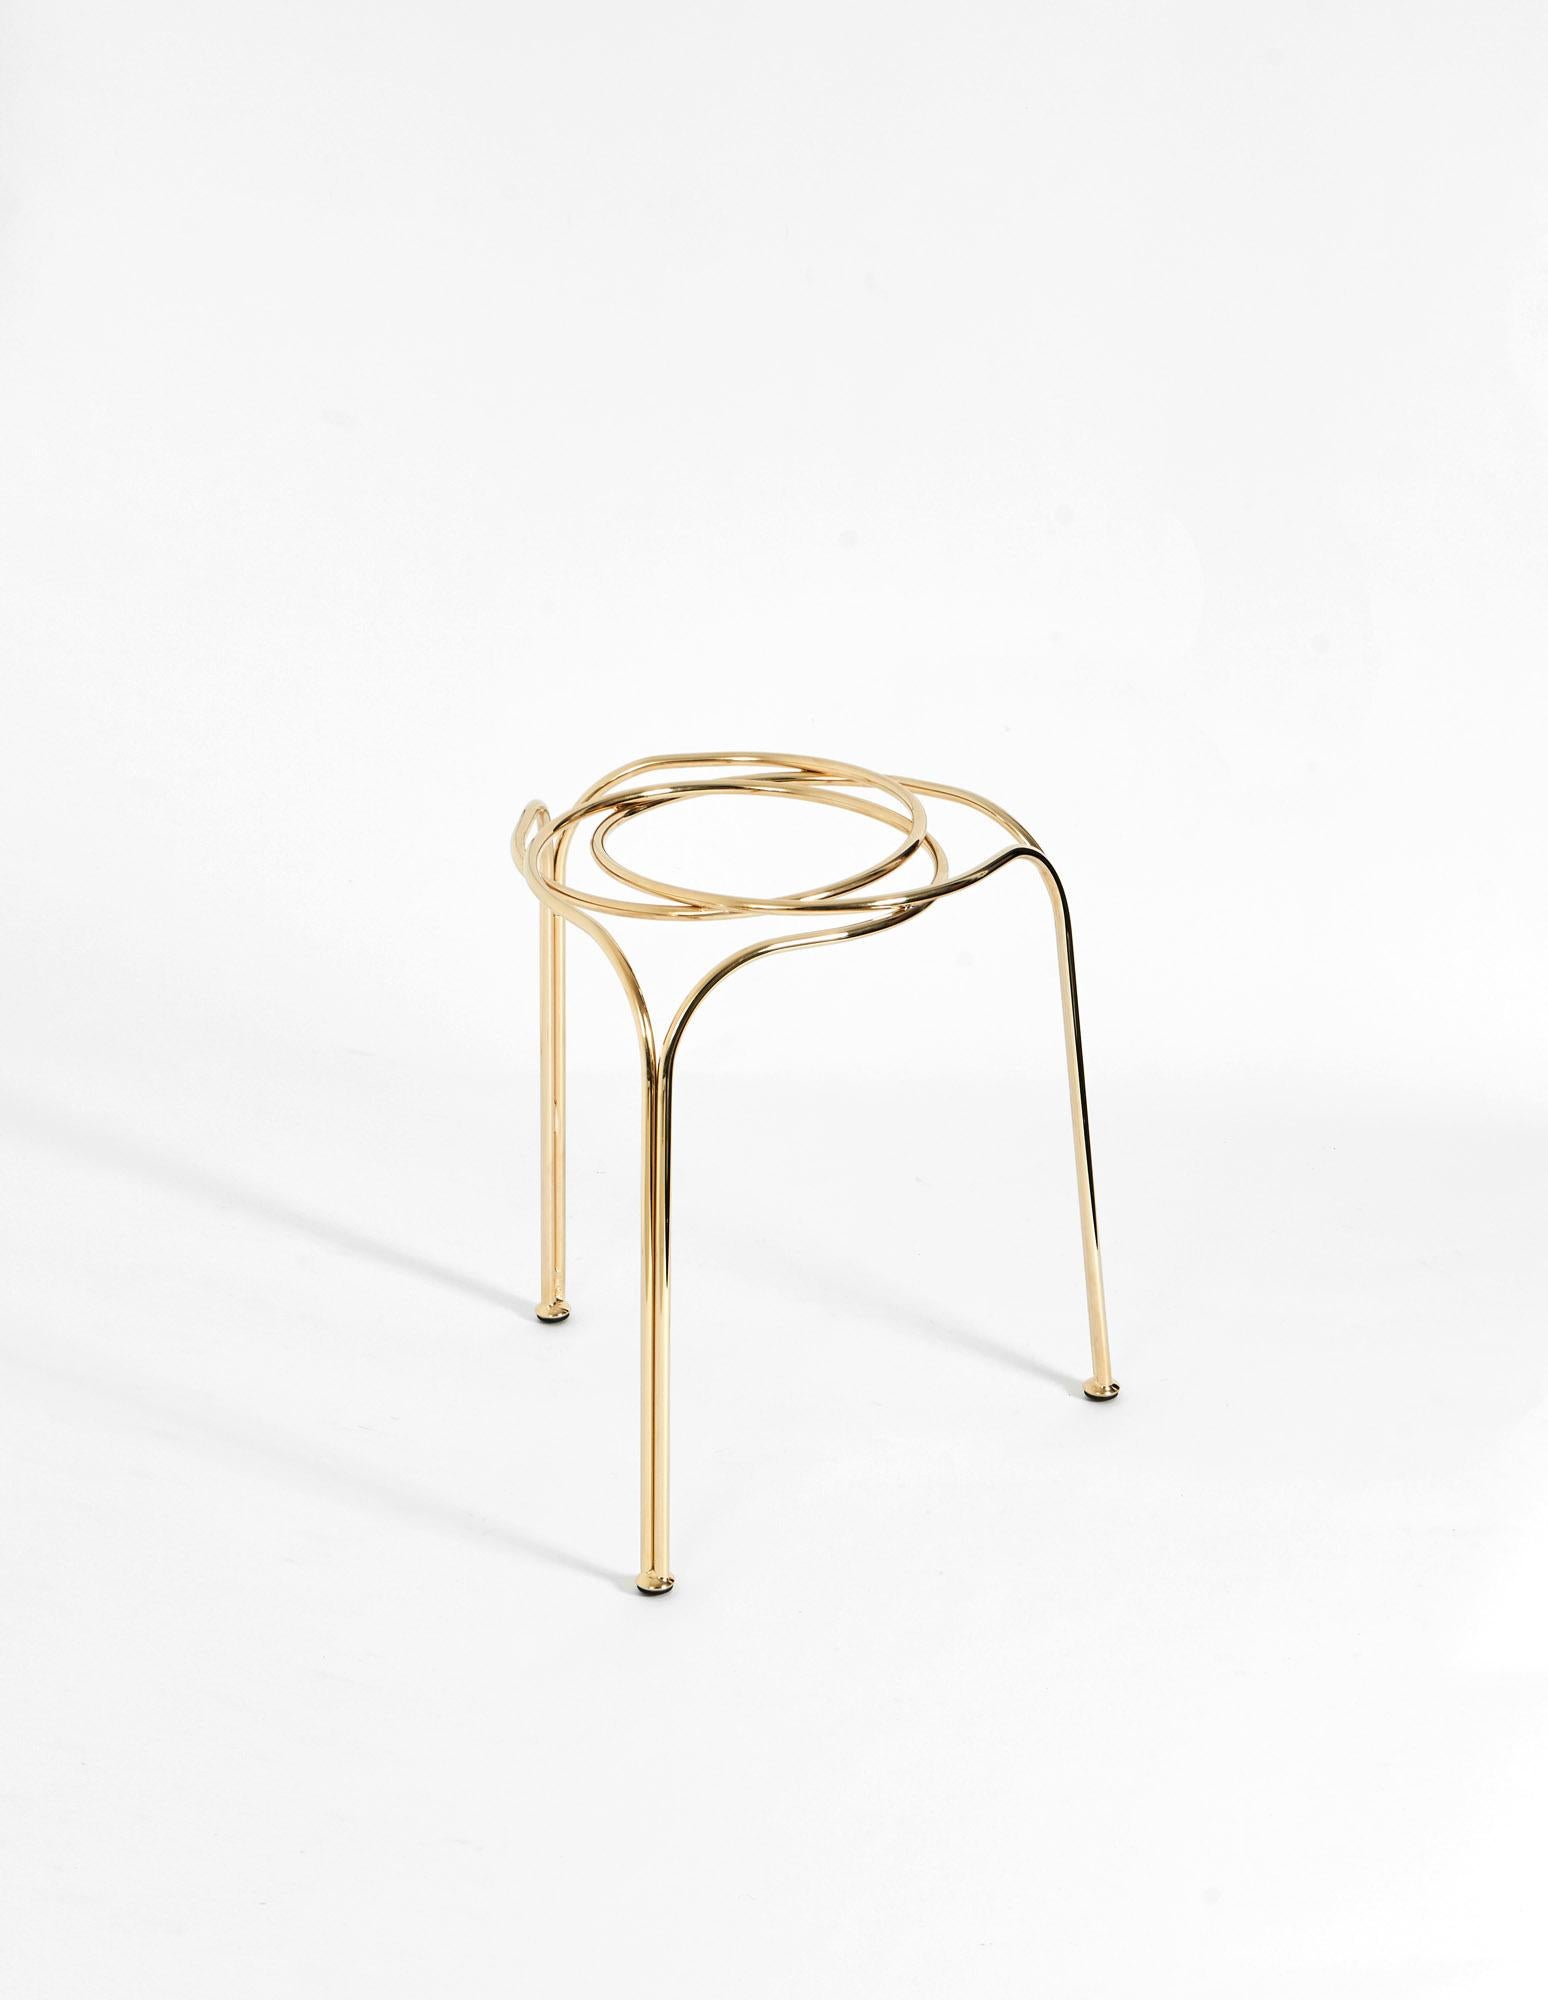 Flow Contemporary and Minimalist Gold Stool Made in Italy by LapiegaWD In New Condition For Sale In Verona, IT